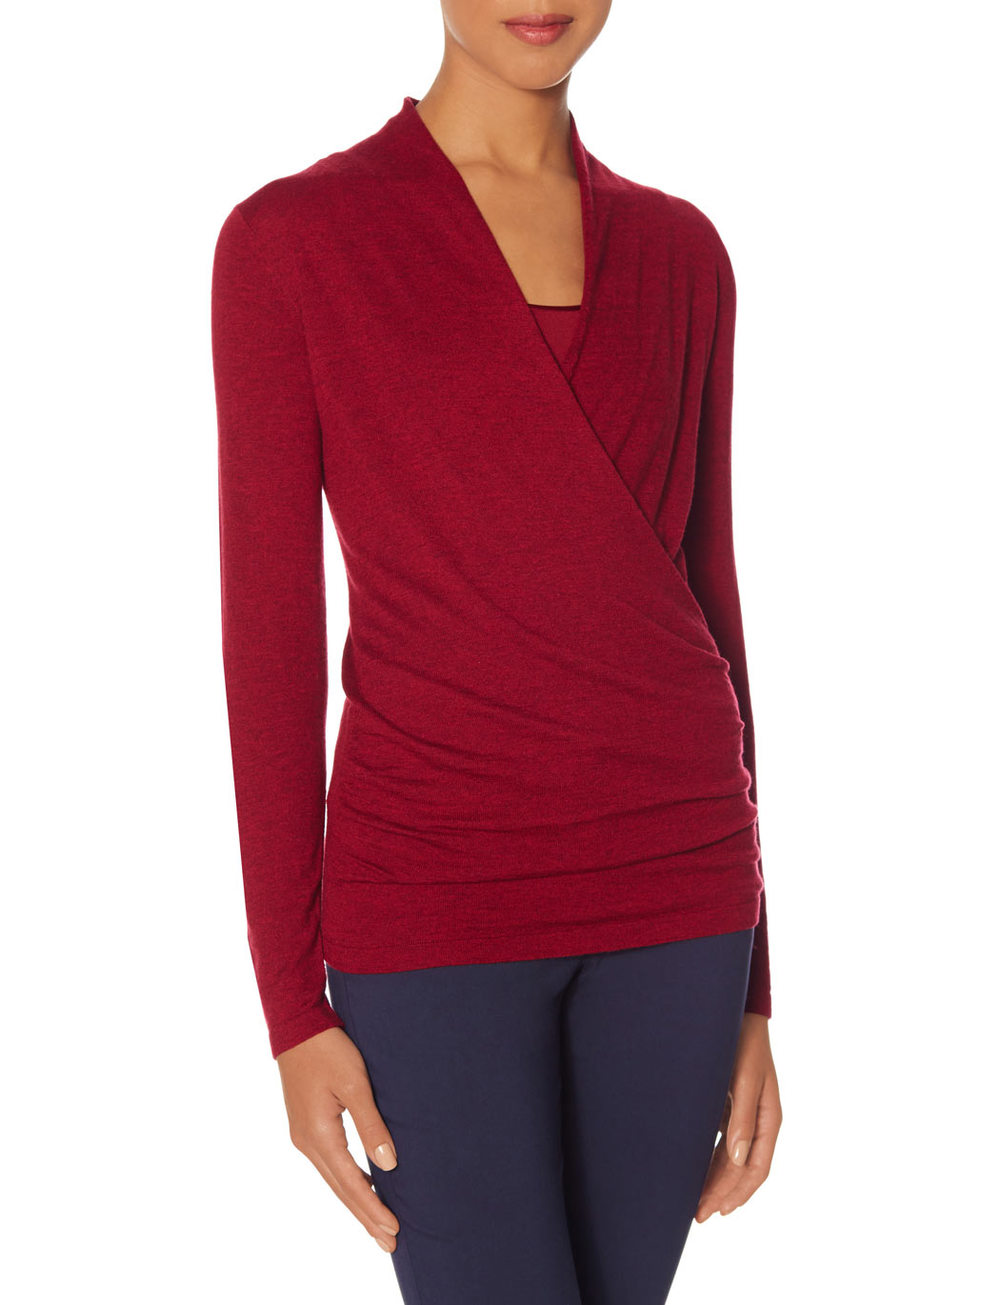  Tall Wrap Look Sweater. Available in red, navy, mint green. The Limited. $49.95. 